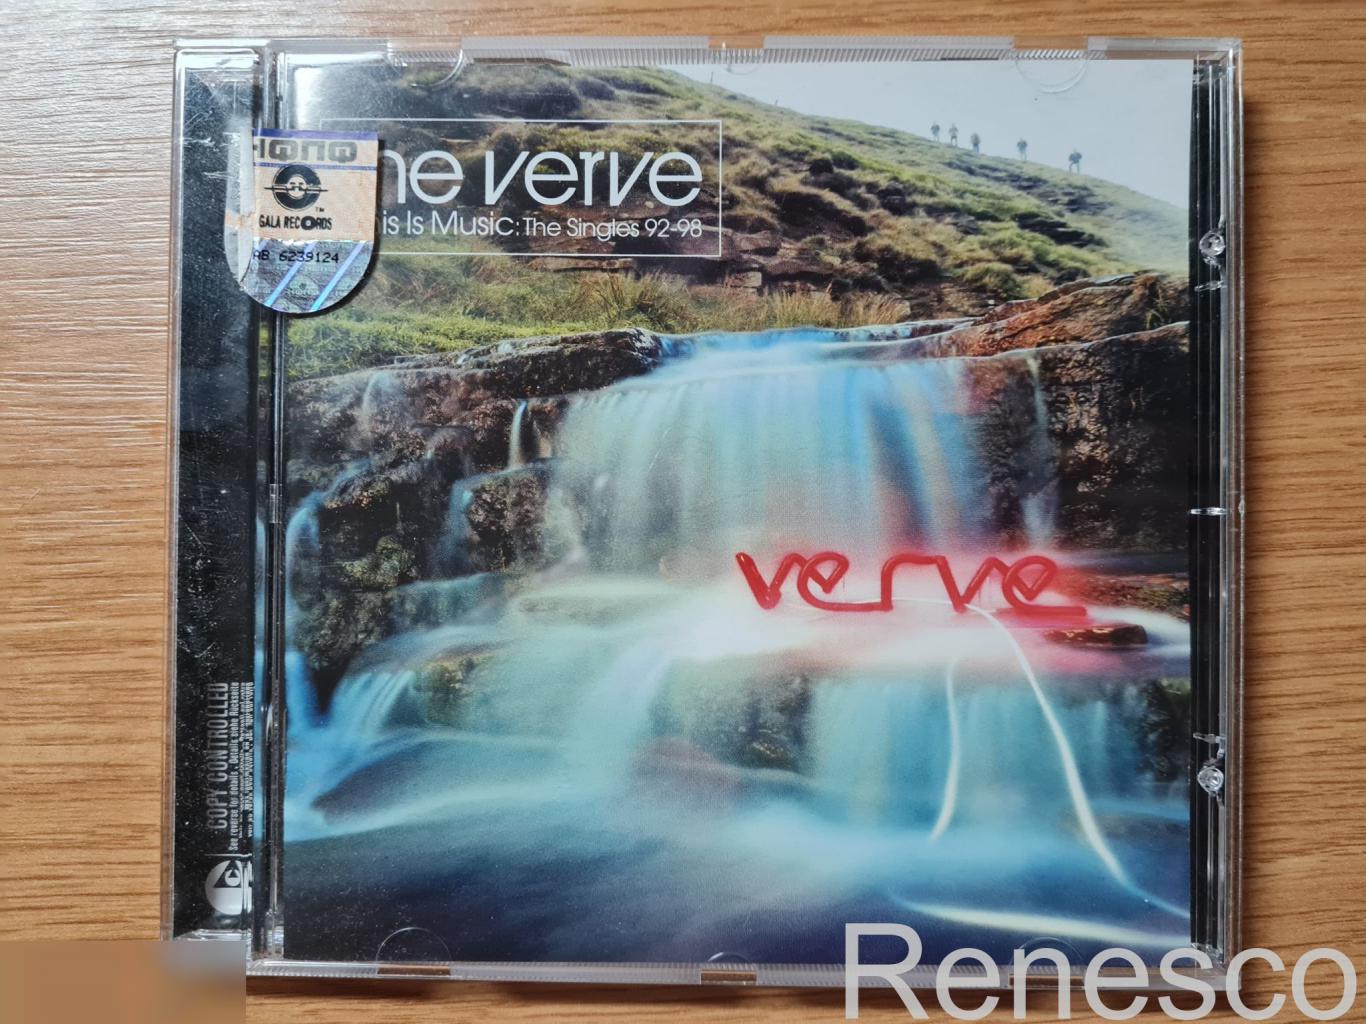 The Verve ?– This Is Music: The Singles 92-98 (Europe) (2004)